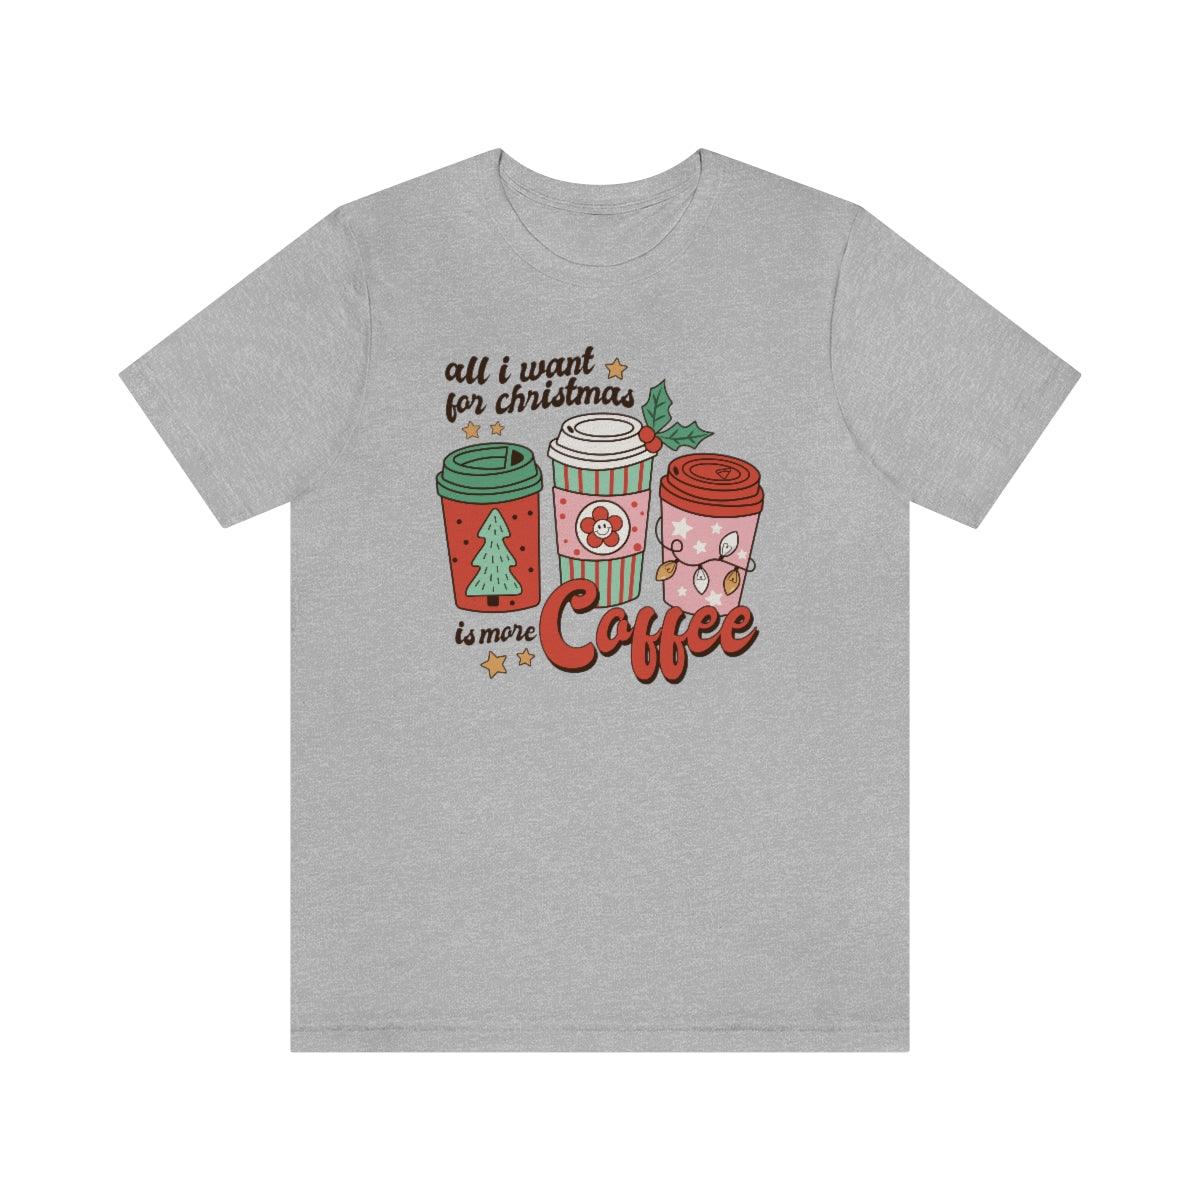 Retro All I want For Christmas Is More Coffee Christmas Shirt Short Sleeve Tee - Crystal Rose Design Co.